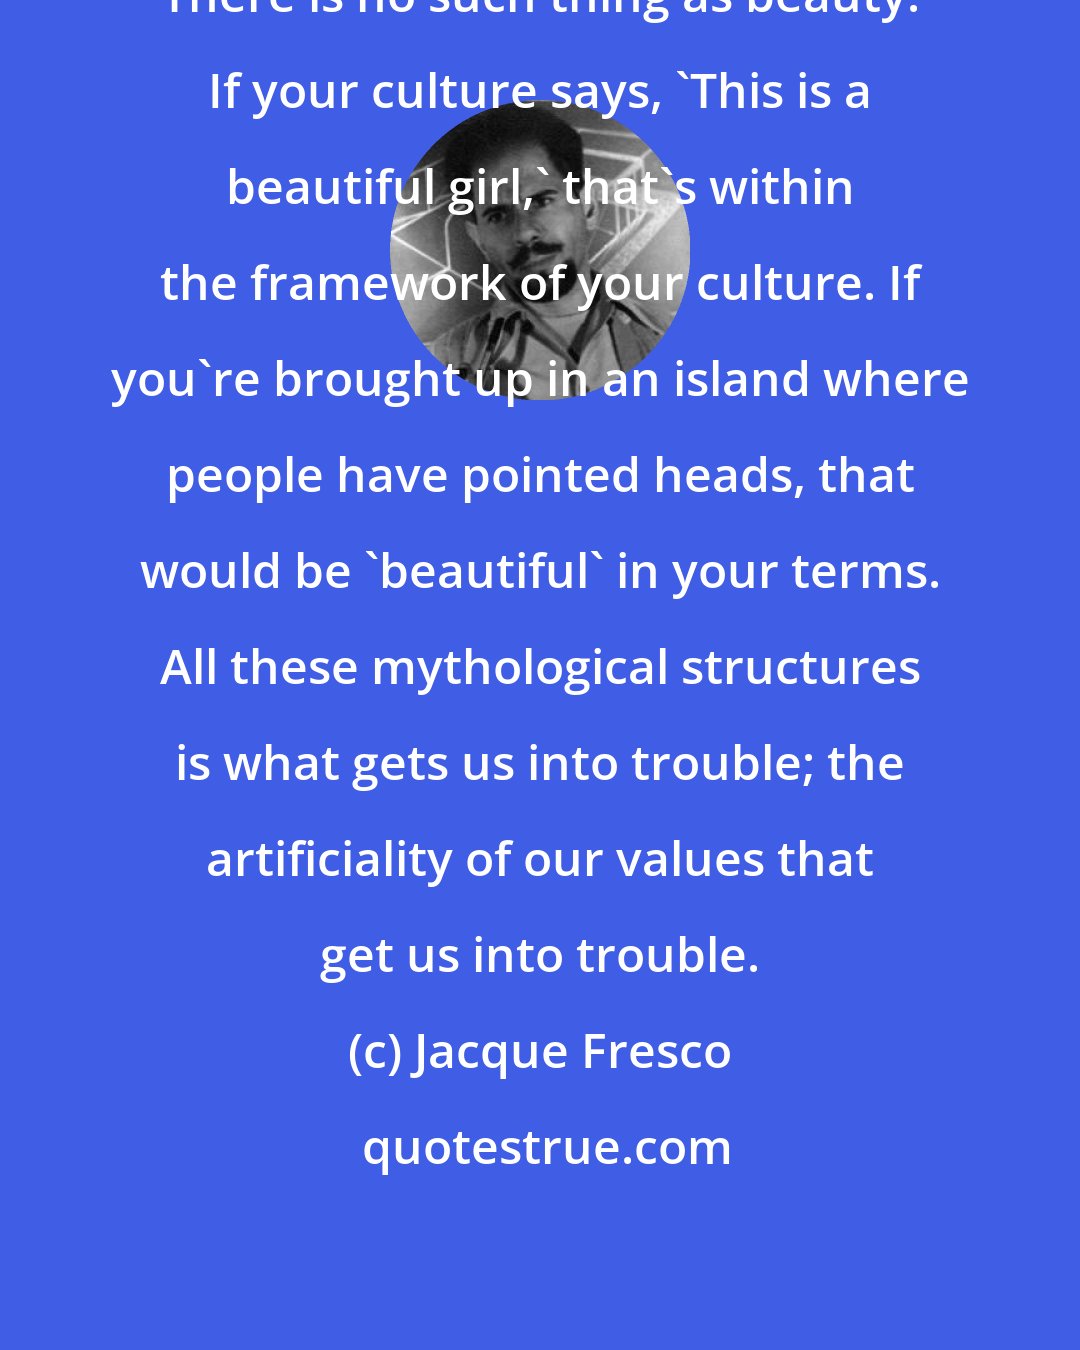 Jacque Fresco: There is no such thing as beauty. If your culture says, 'This is a beautiful girl,' that's within the framework of your culture. If you're brought up in an island where people have pointed heads, that would be 'beautiful' in your terms. All these mythological structures is what gets us into trouble; the artificiality of our values that get us into trouble.